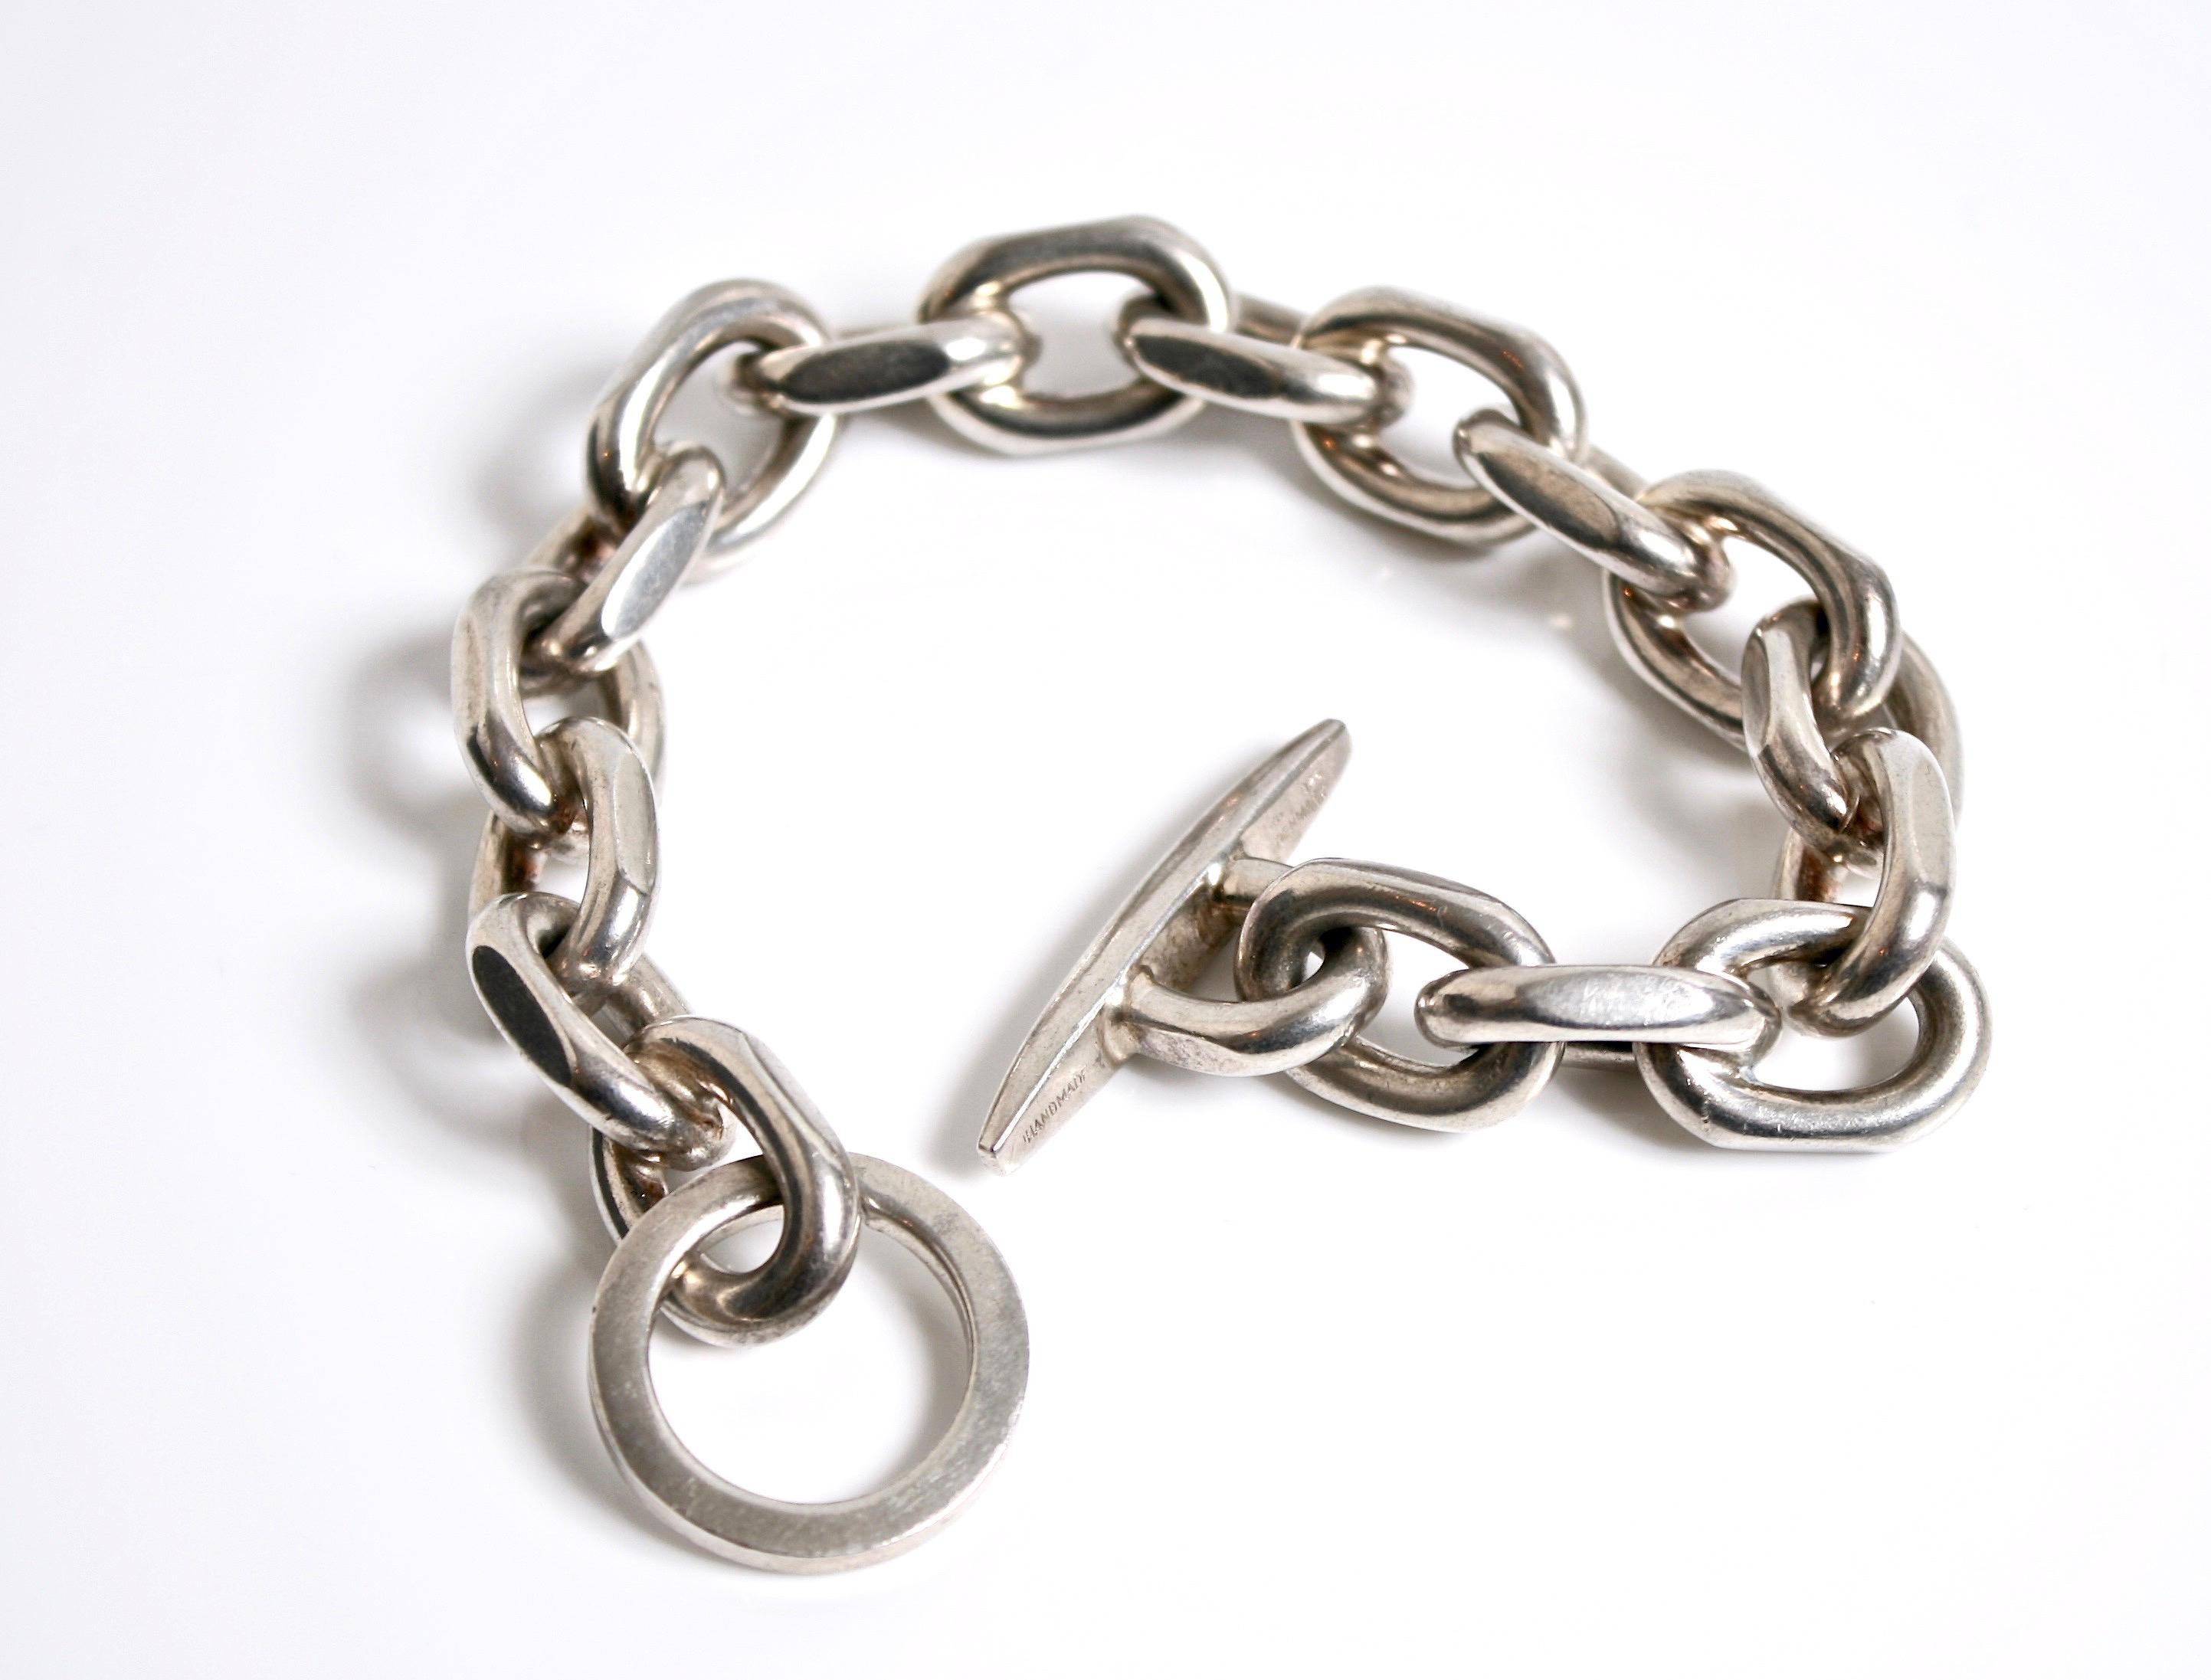 Heavy link sterling silver hand made chain bracelet designed by Randers Solv Denmark c.1970 signed RS Denmark
Squared links with large O ring

